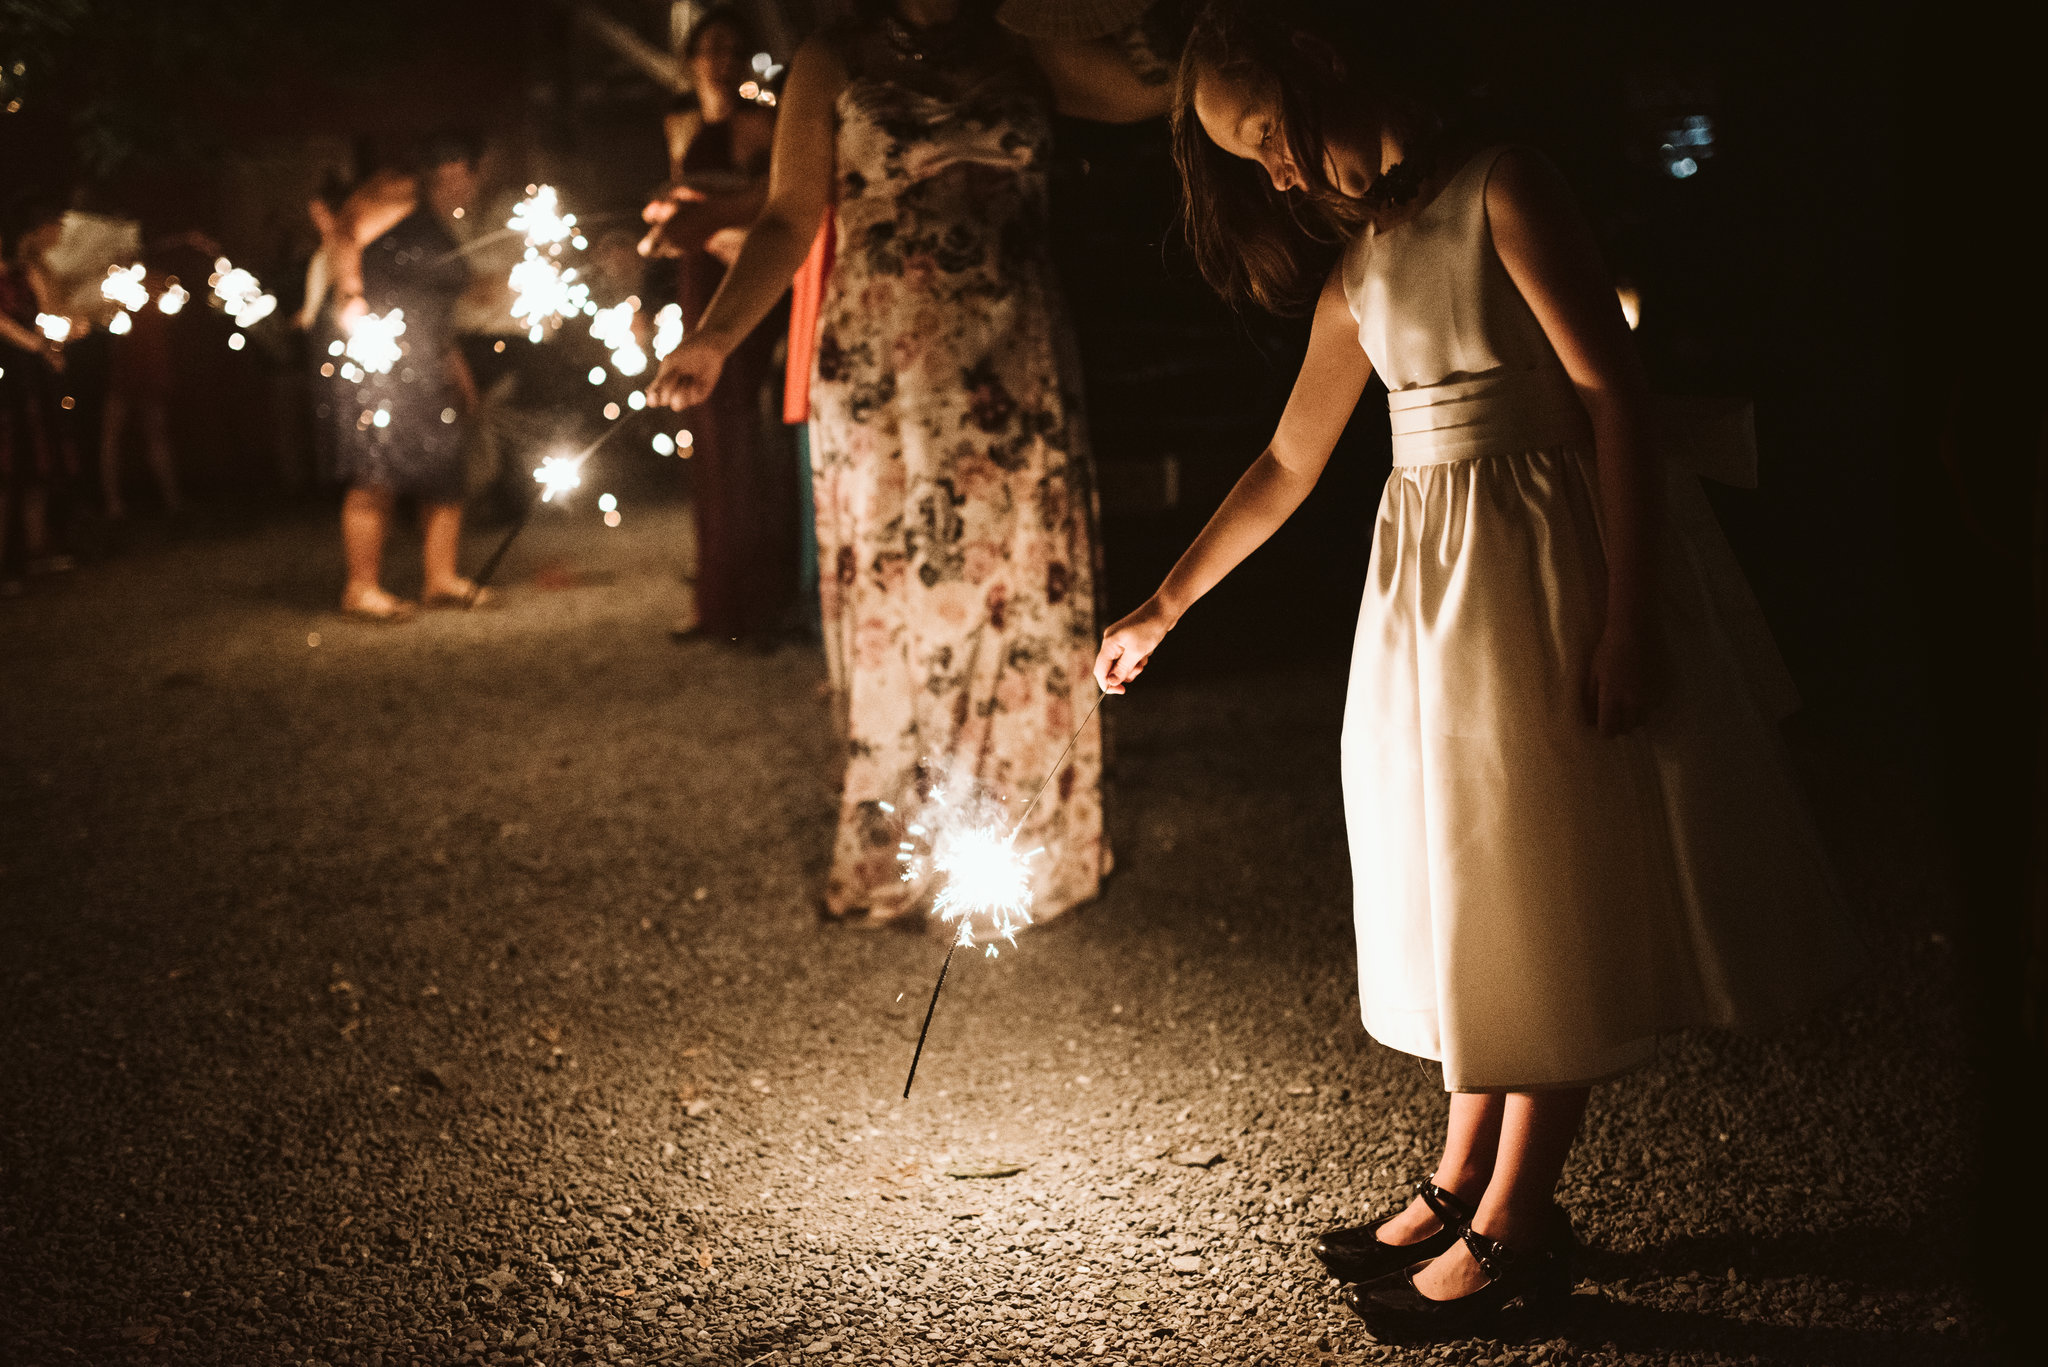 Rocklands Farm, Maryland, Intimate Wedding, Baltimore Wedding Photographer, Sungold Flower Co, Rustic, Romantic, Barn Wedding, Flower Girl Outside with Sparkler, Nighttime Photo